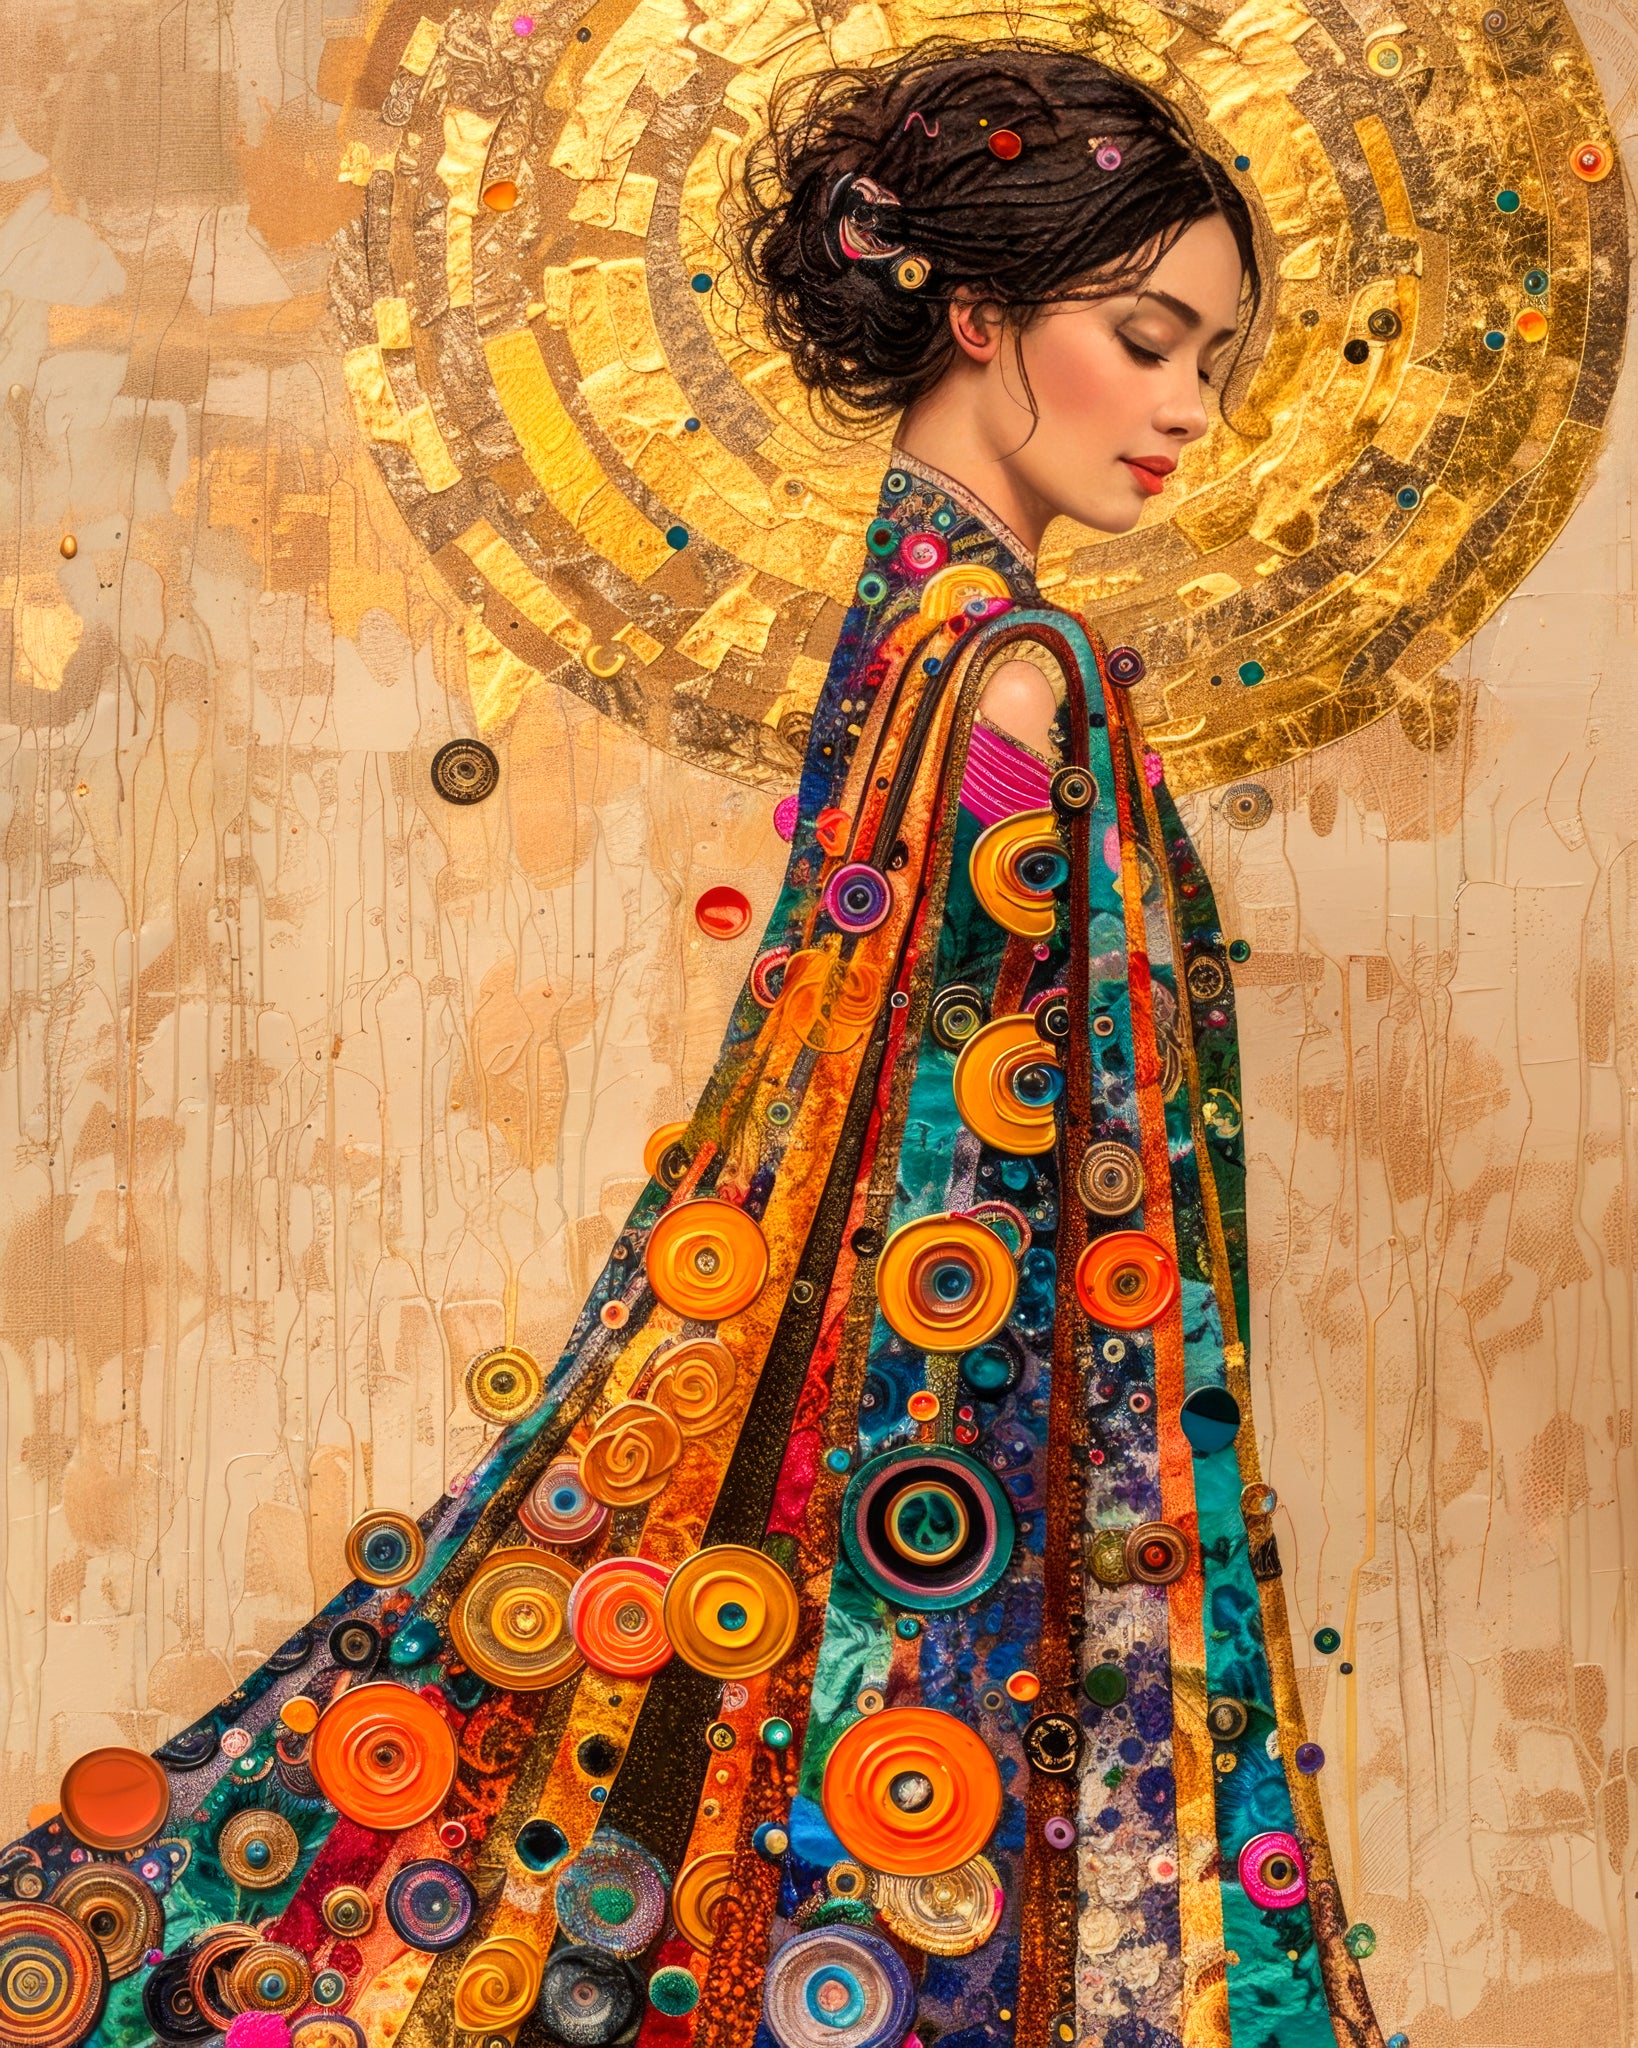 Fine art print of a woman in a colorful robe with golden halo from the Heart Of Gold collection.